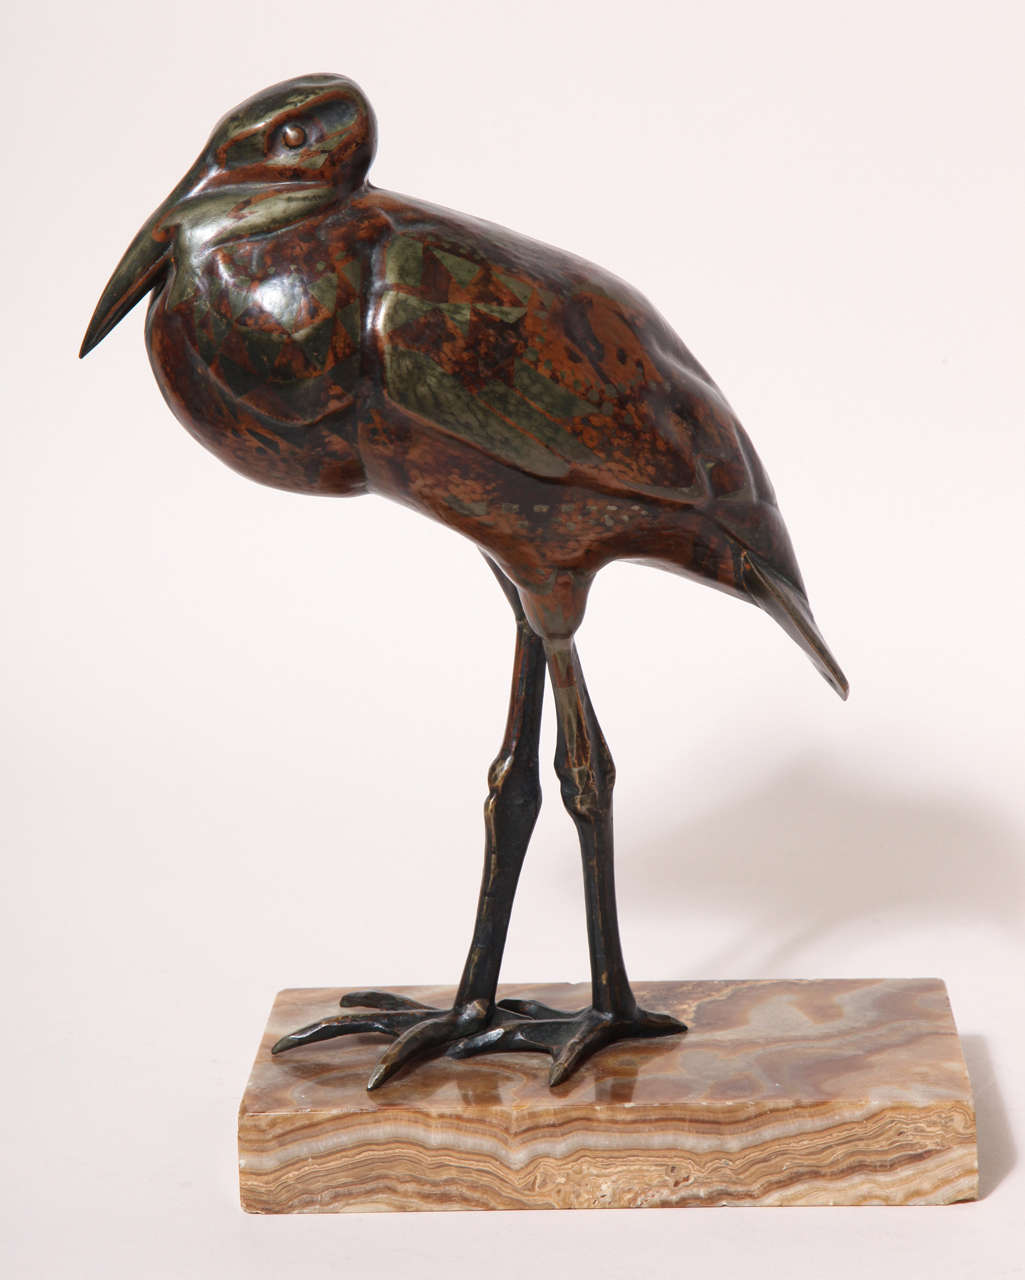 The dinanderie body of the stork is made of copper with inlaid silver and the legs are solid bronze mounted on a brown marble base.

Signed:  'Bigard' on underside of tail and on marble base